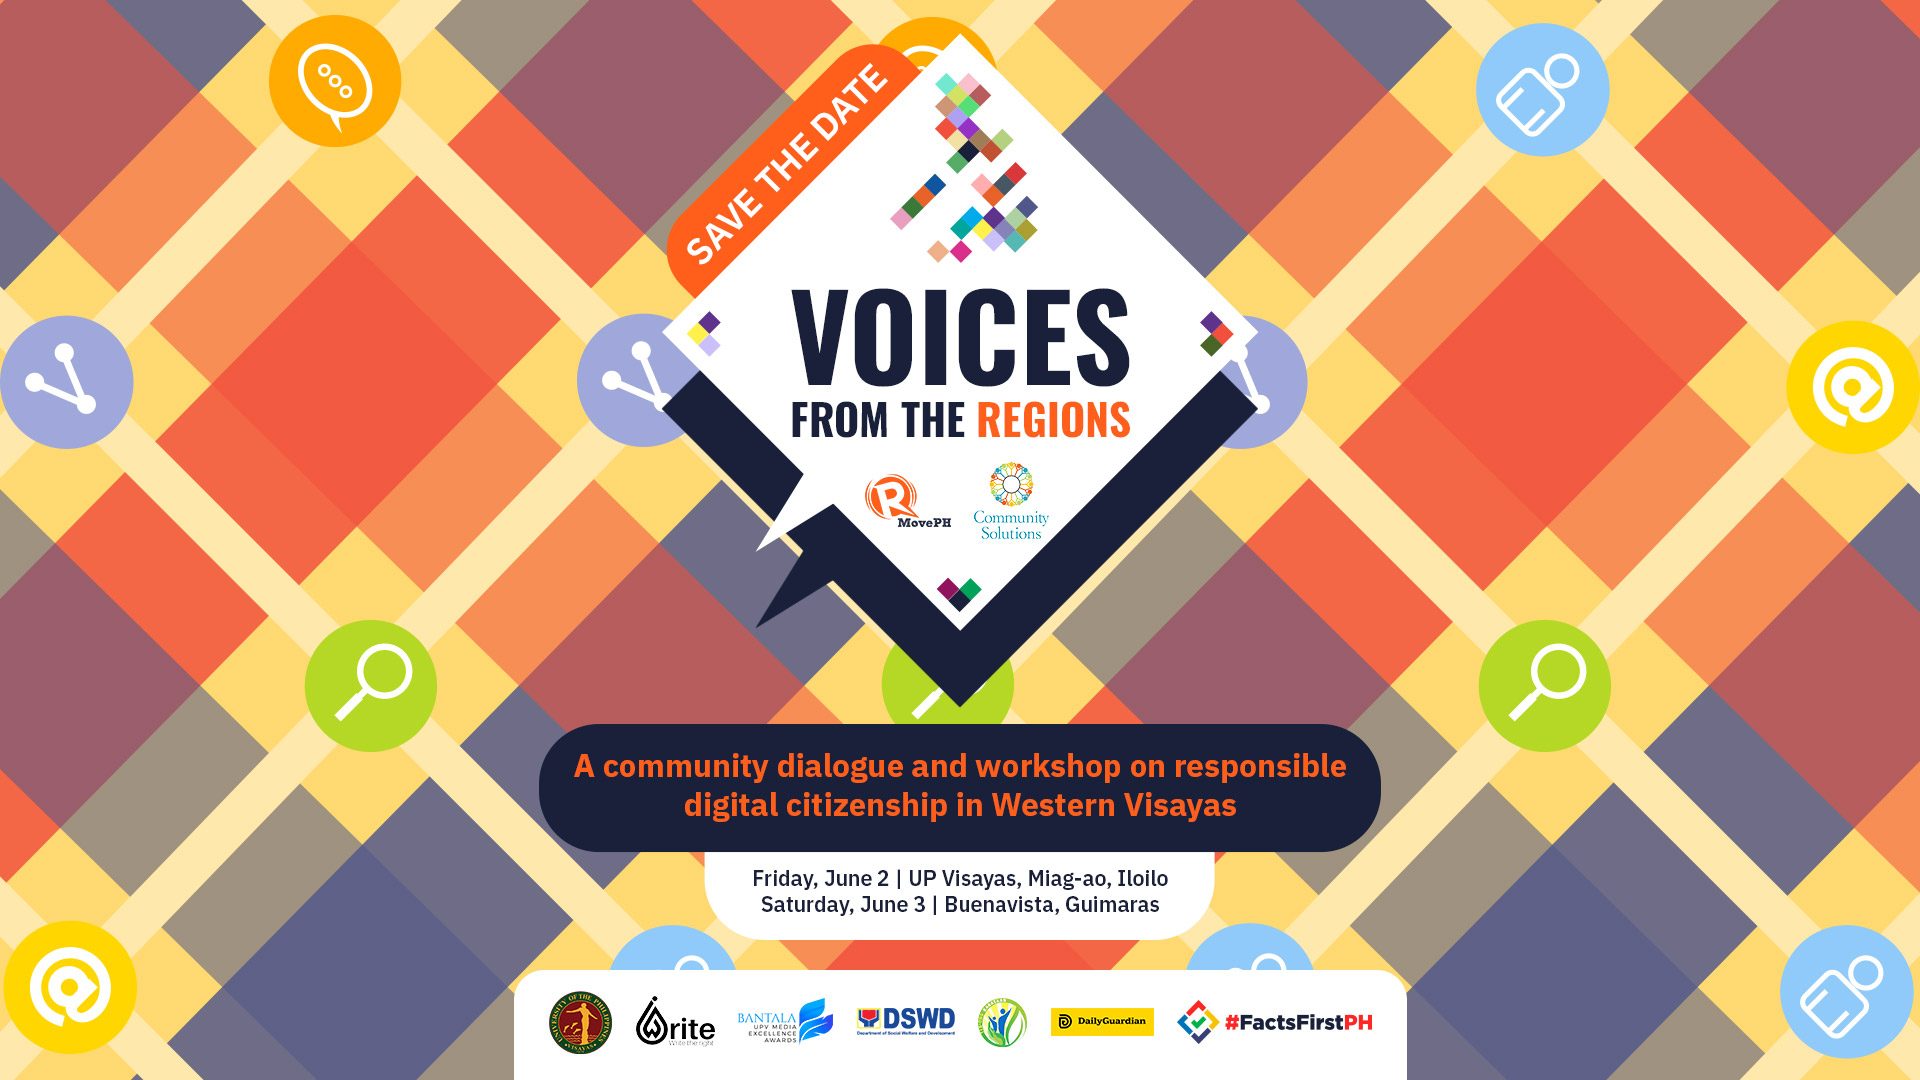 #VoicesFromTheRegions: Join community dialogue, workshop on digital citizenship in Iloilo, Guimaras